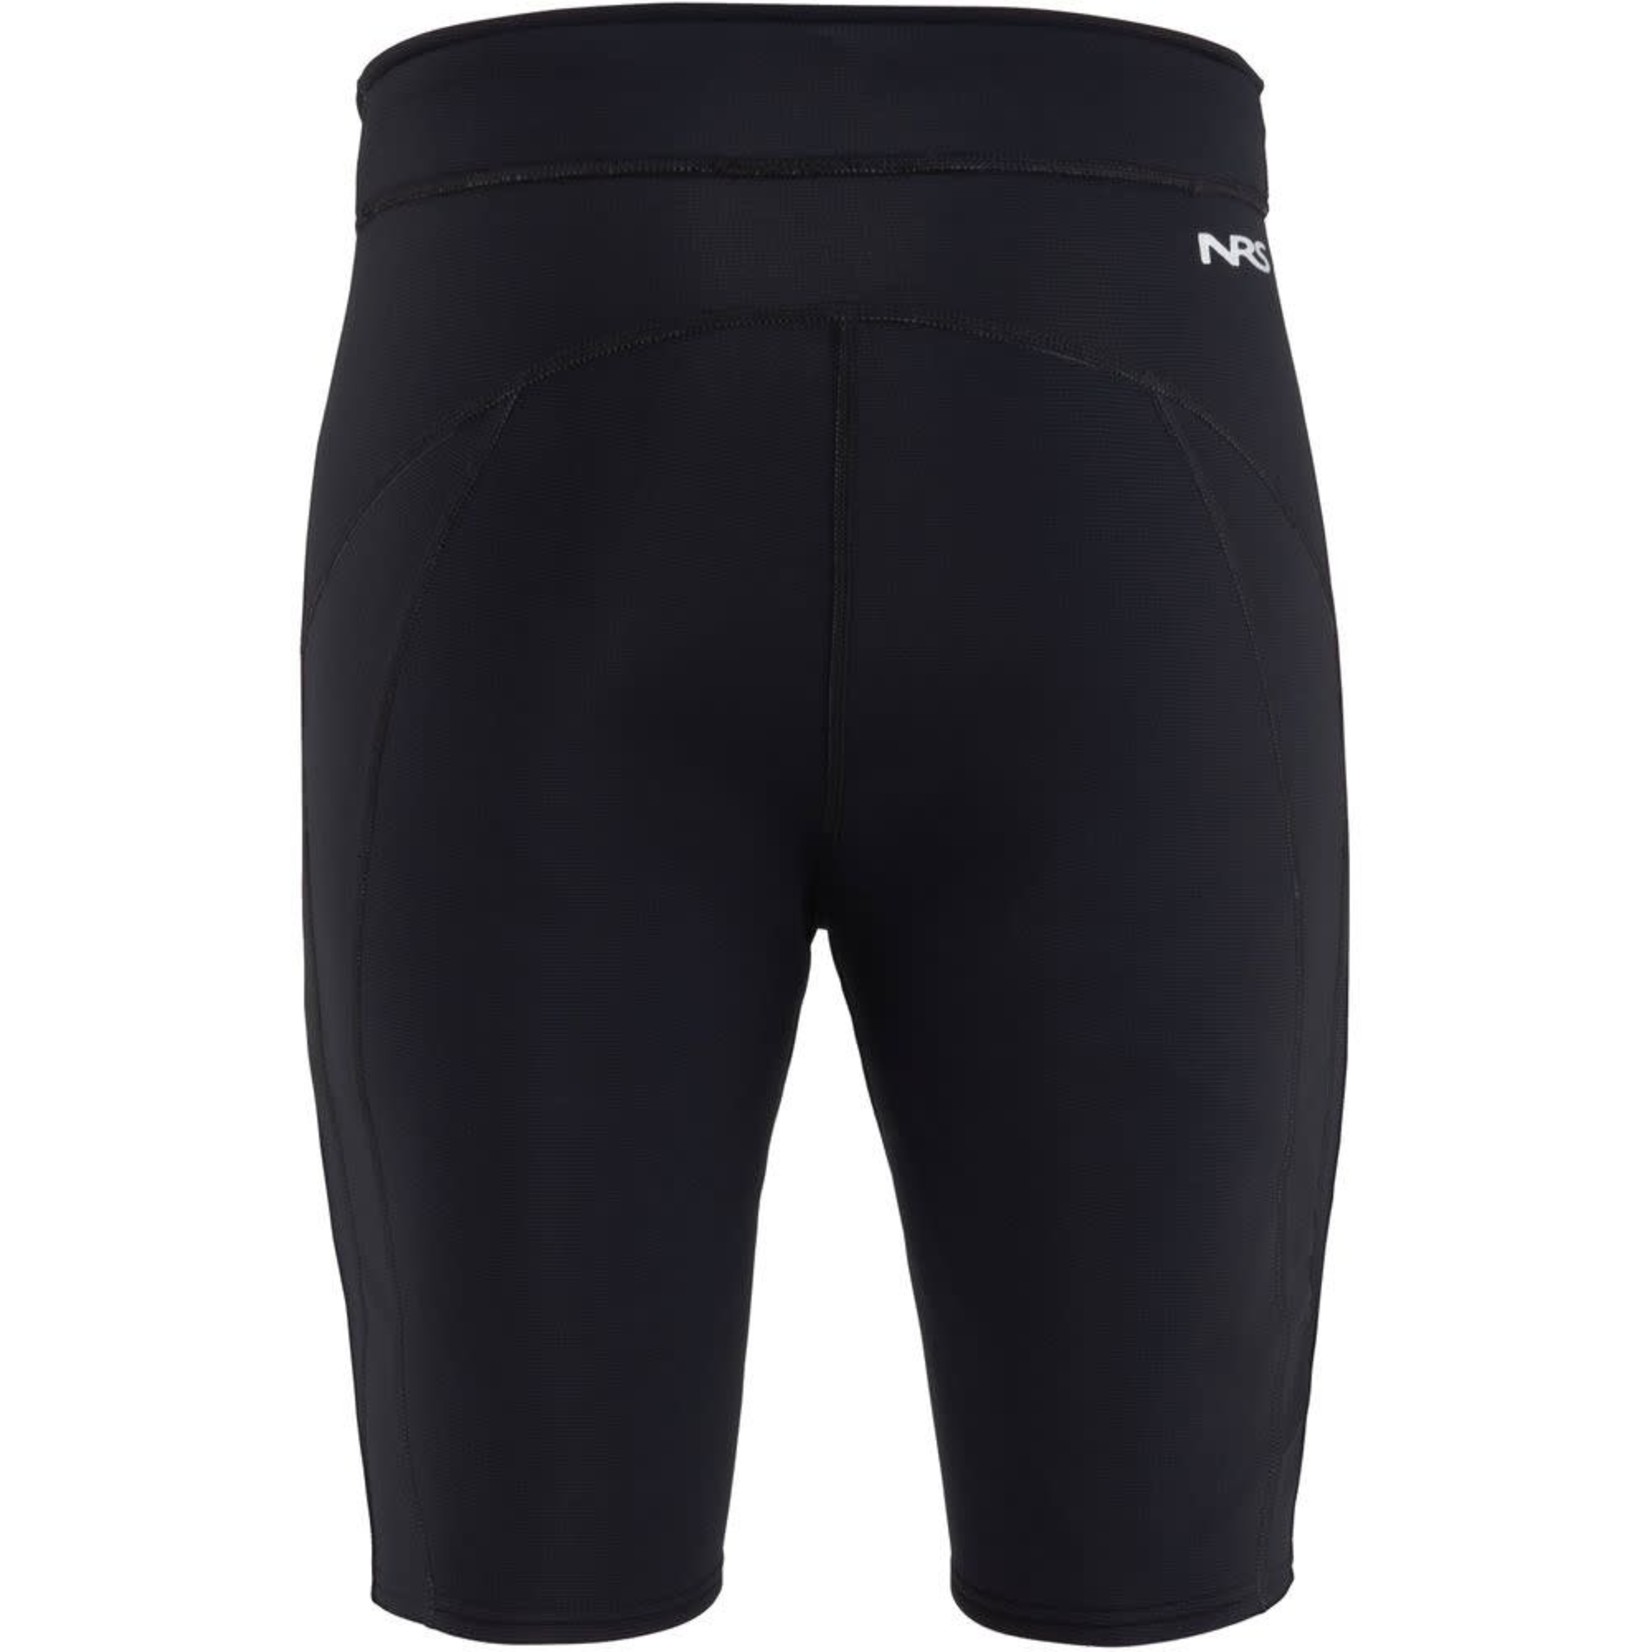 NRS NRS M's HydroSkin 0.5 Short